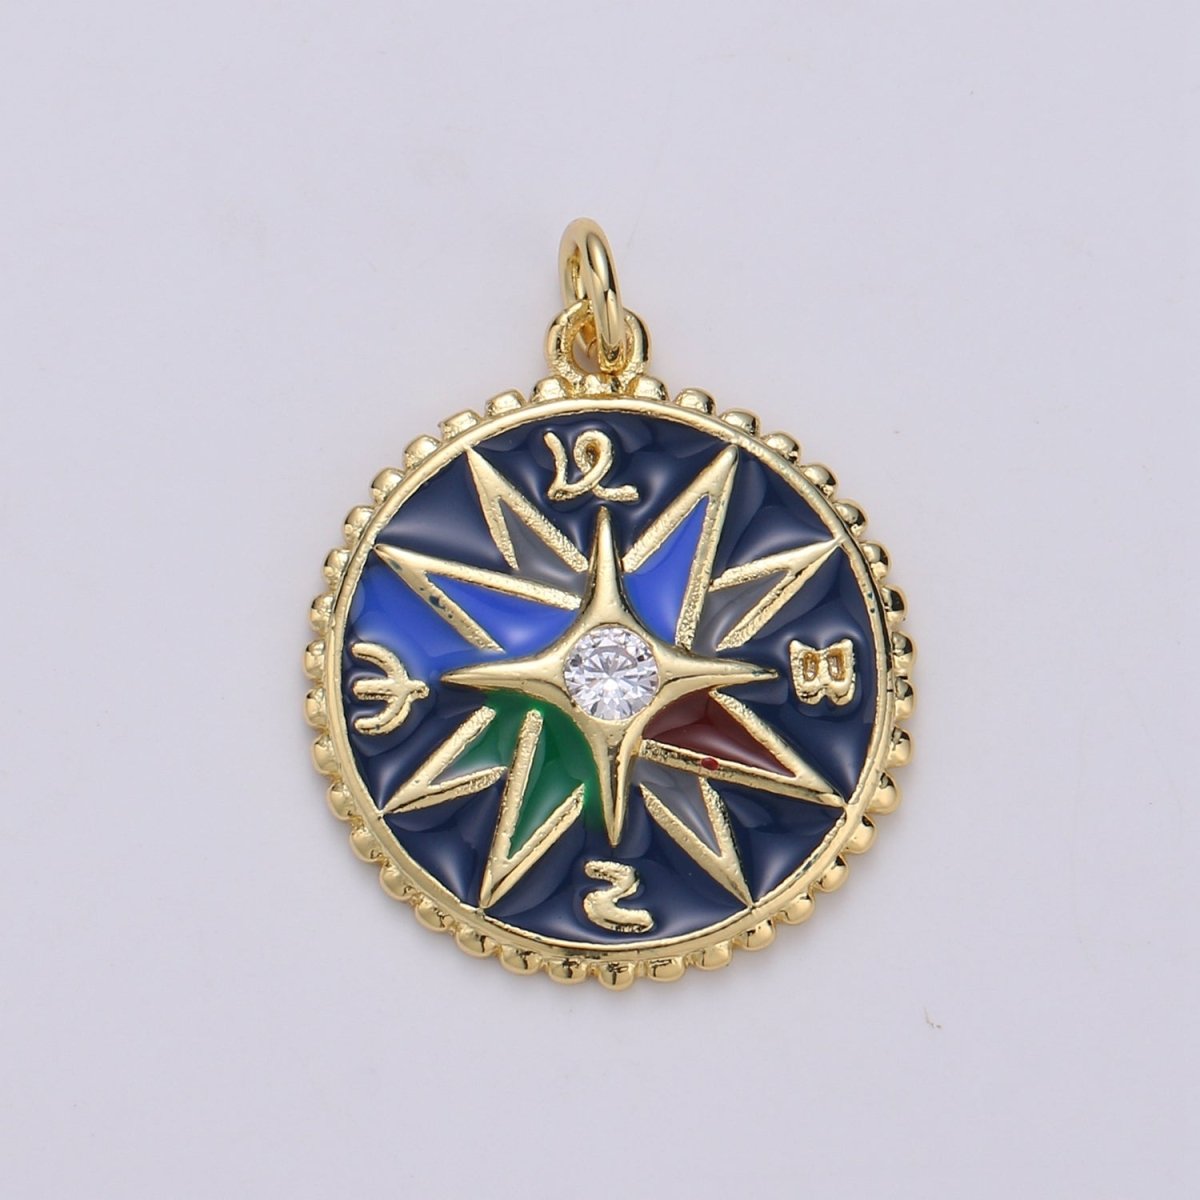 Enamel charms 24K Gold Filled compass charm, Epoxy Blue pendant, talisman charm Travel Jewelry Adventure Designer Inspired Necklace D-866 - DLUXCA